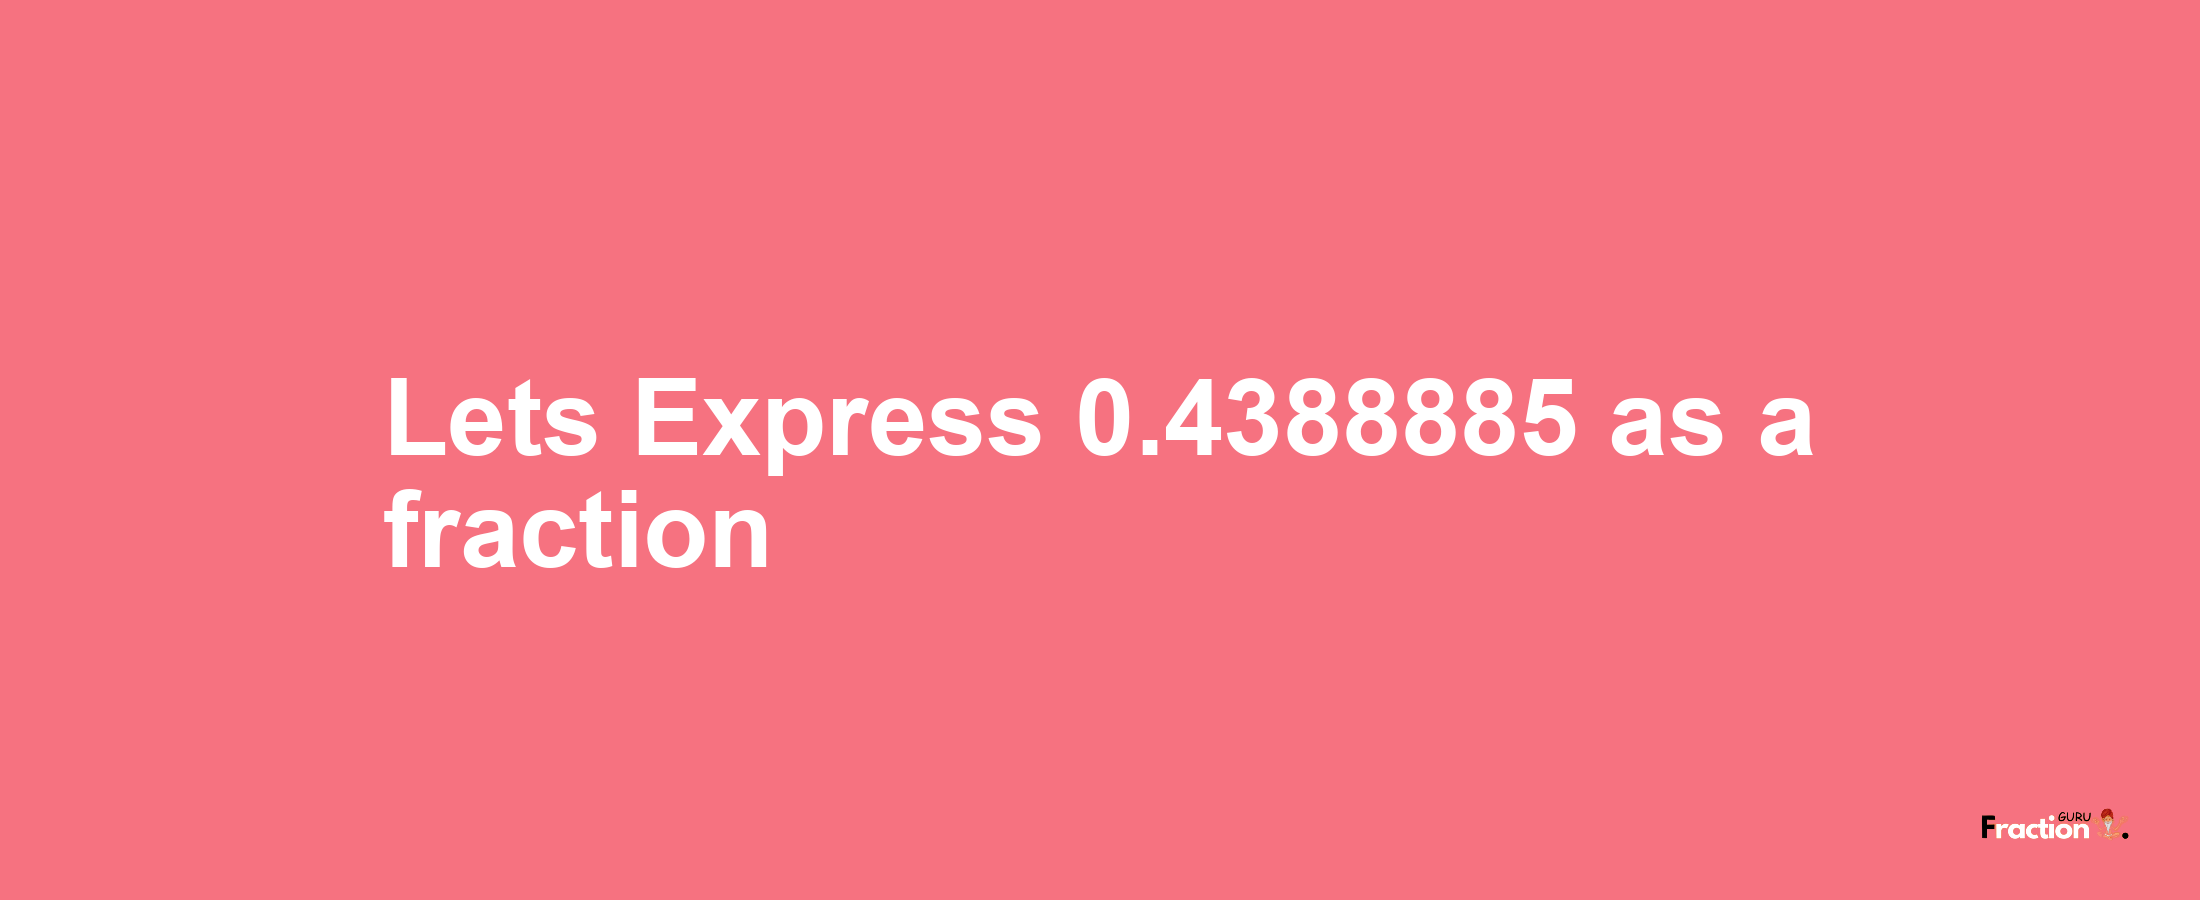 Lets Express 0.4388885 as afraction